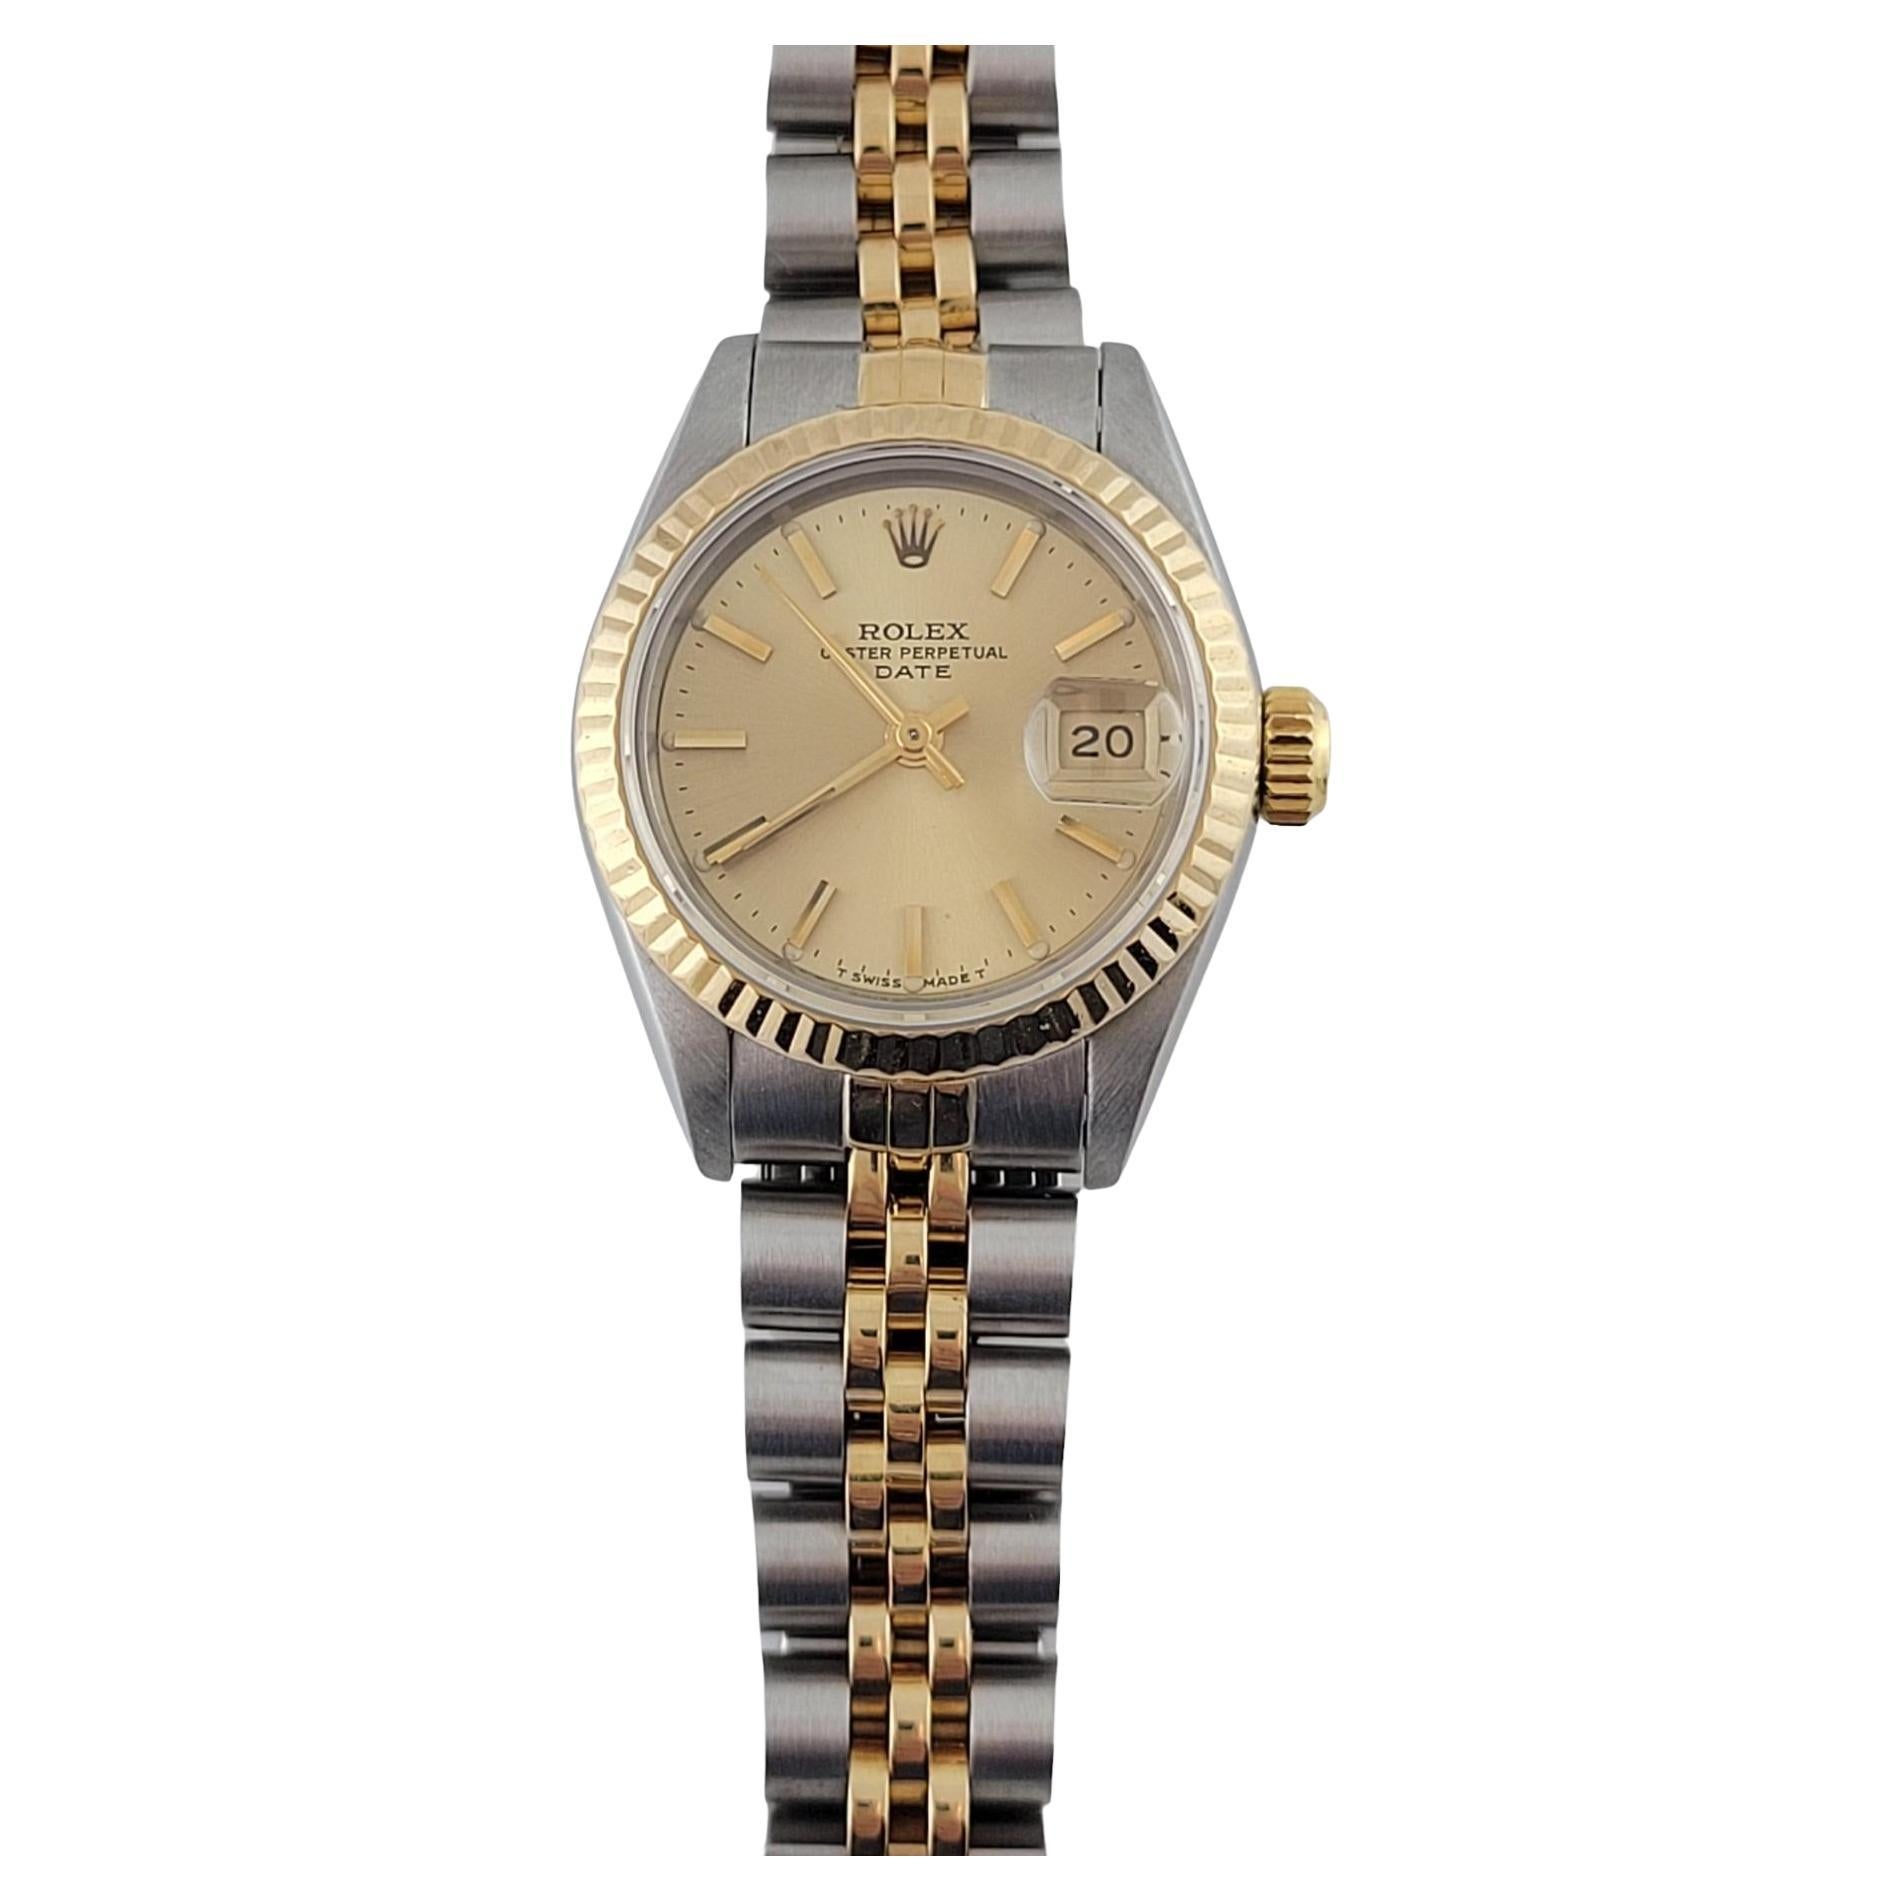 1984 Rolex Ladies Two Tone Watch 69173 Jubilee Band Gold Dial #17221 For Sale